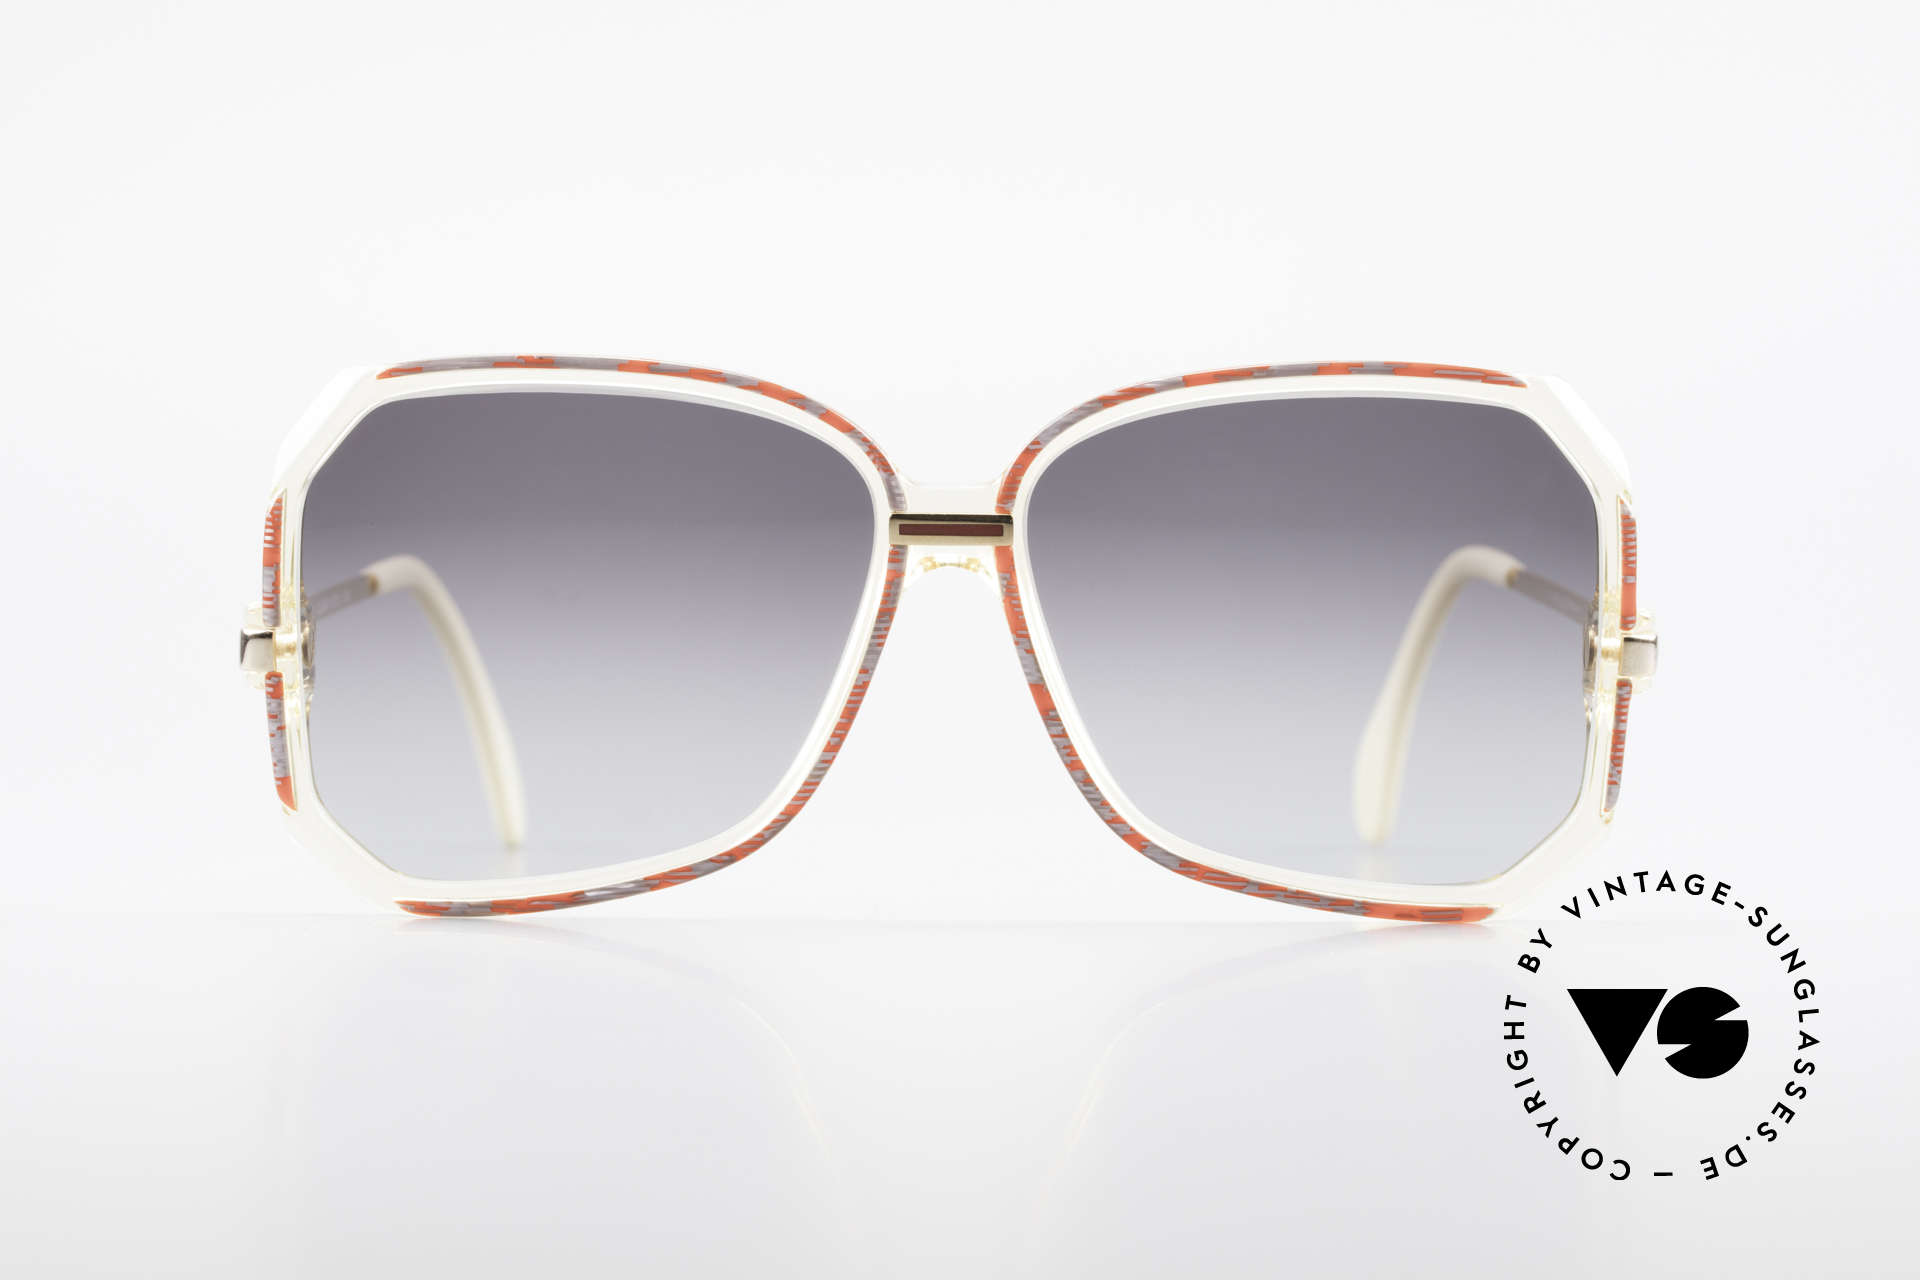 Cazal 167 West Germany 80's Shades, great combination of transparency, color & shape, Made for Women